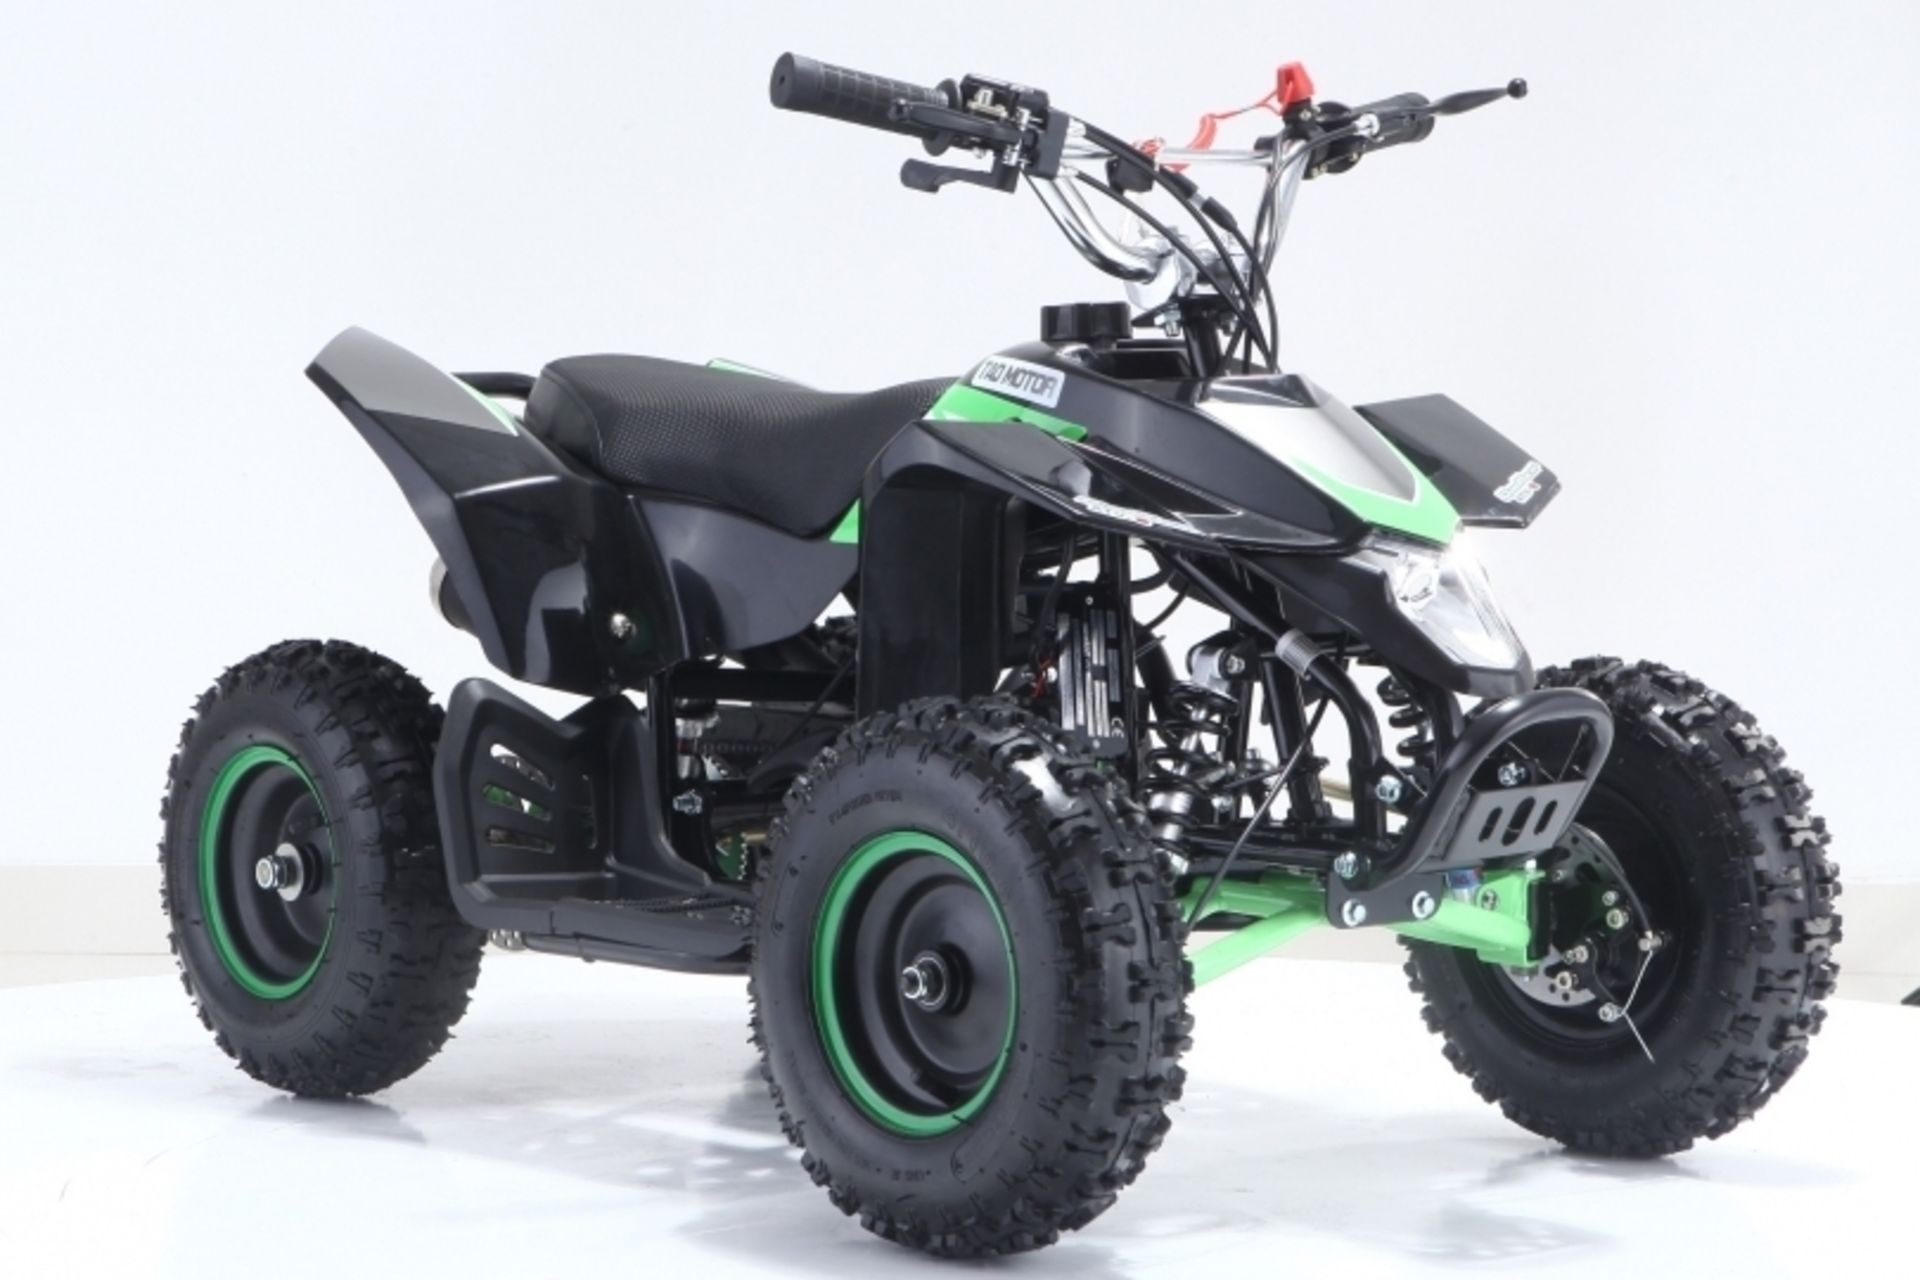 V Brand New 50cc Avenger Mini Off Road Quad Bike - Colours May Vary - Air Cooled - Two Stroke -